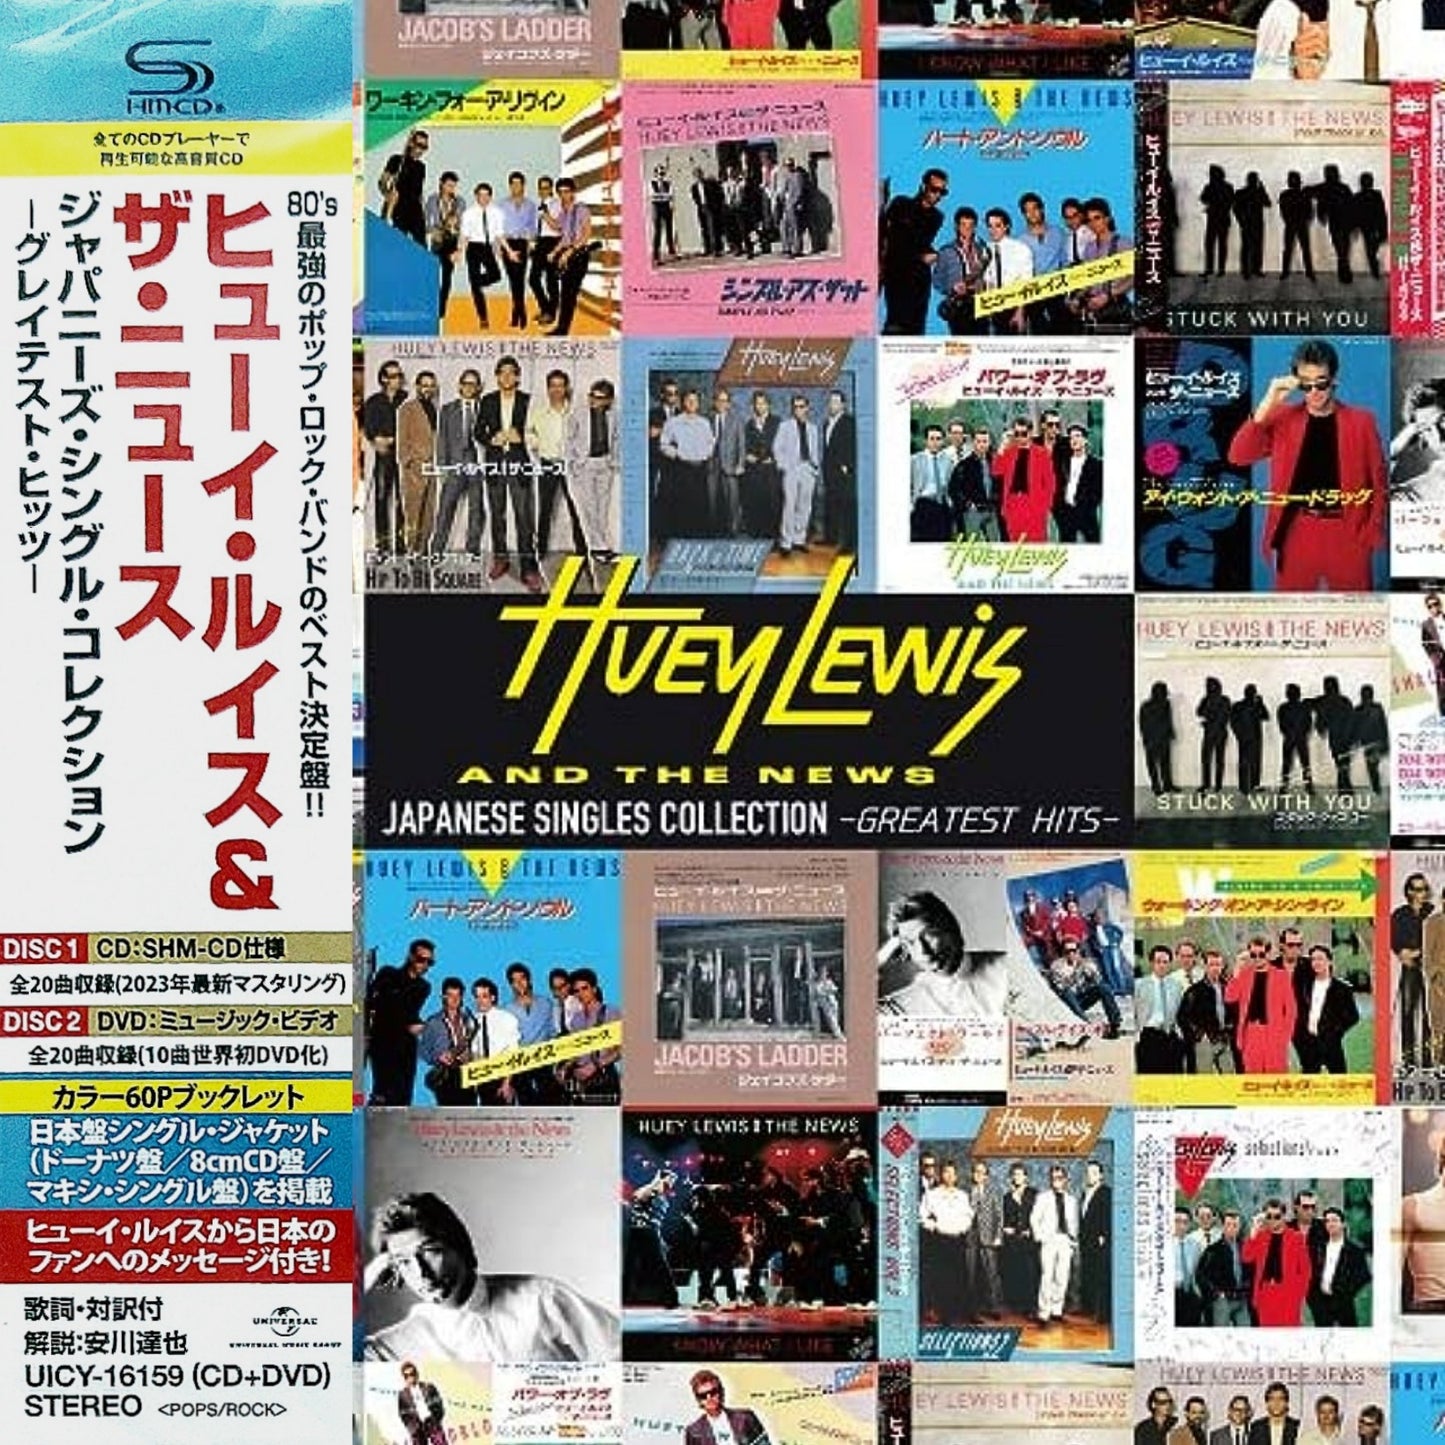 Huey Lewis And The News – Japanese Singles Collection - Greatest Hits CD & DVD